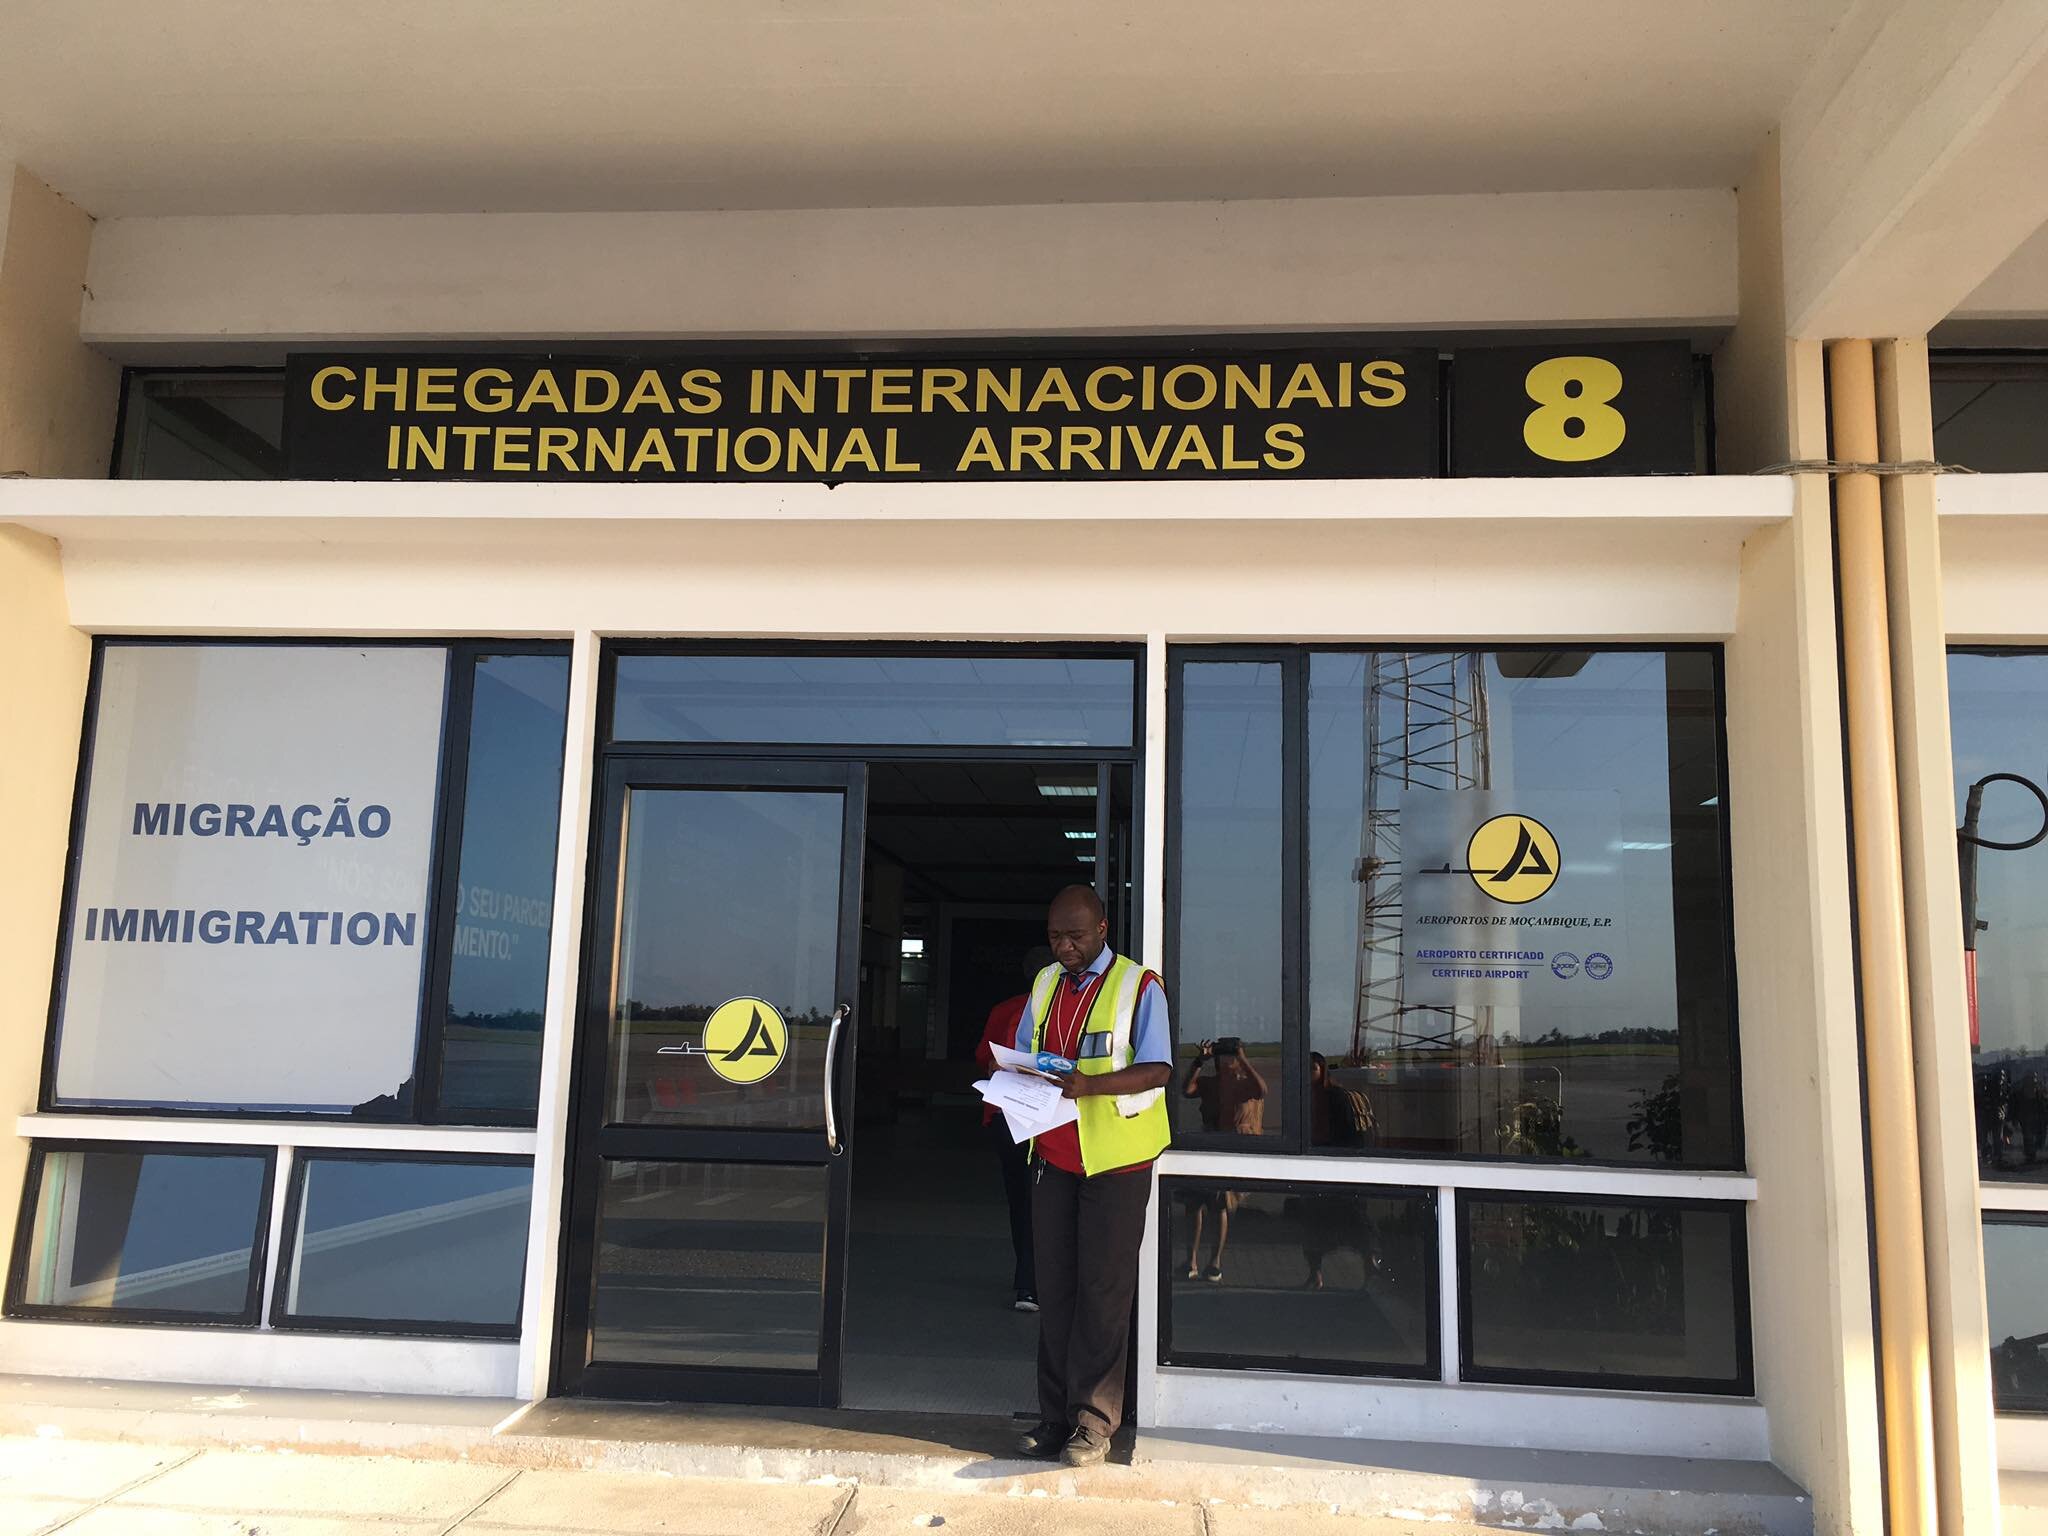 Arrived in our 5th Country stop MOZAMBIQUE3.jpg